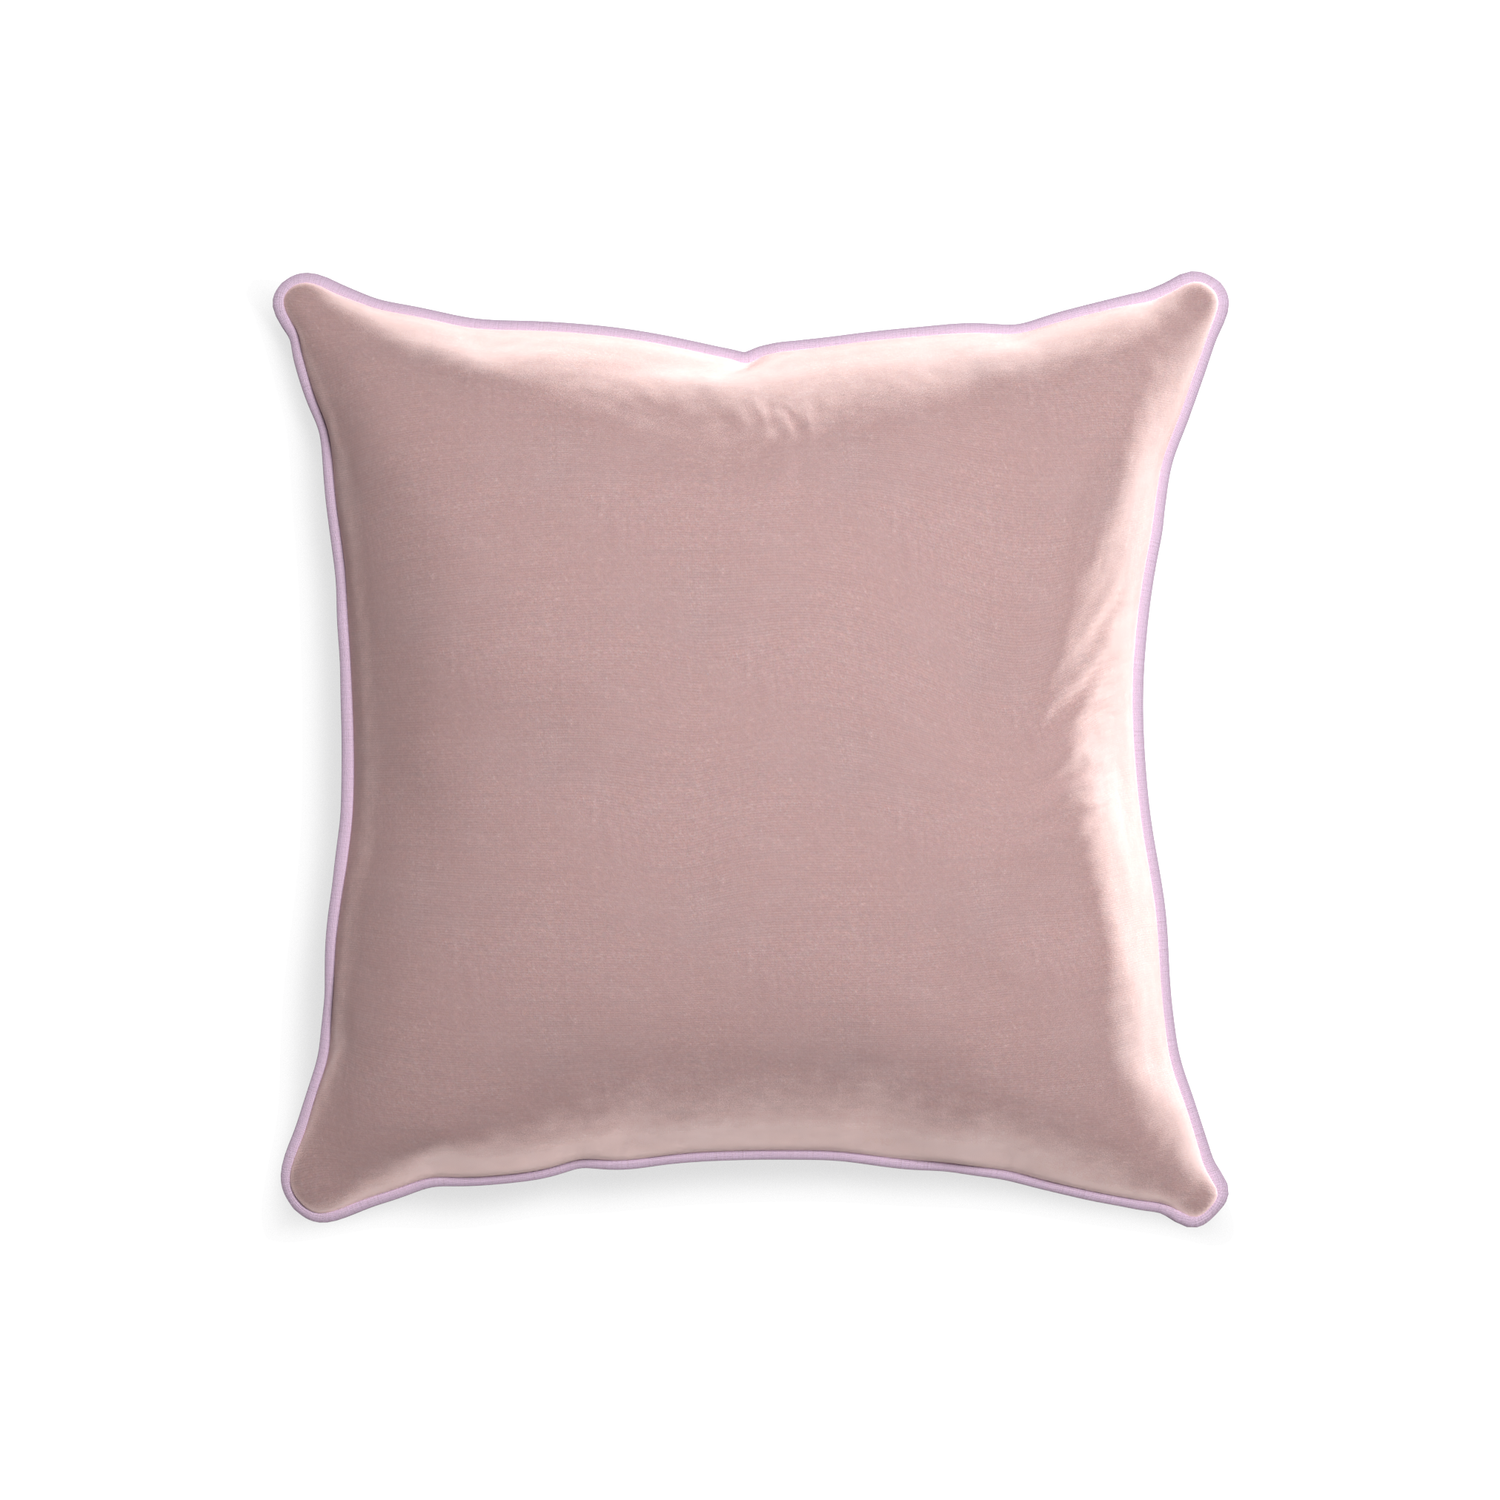 20-square mauve velvet custom pillow with l piping on white background